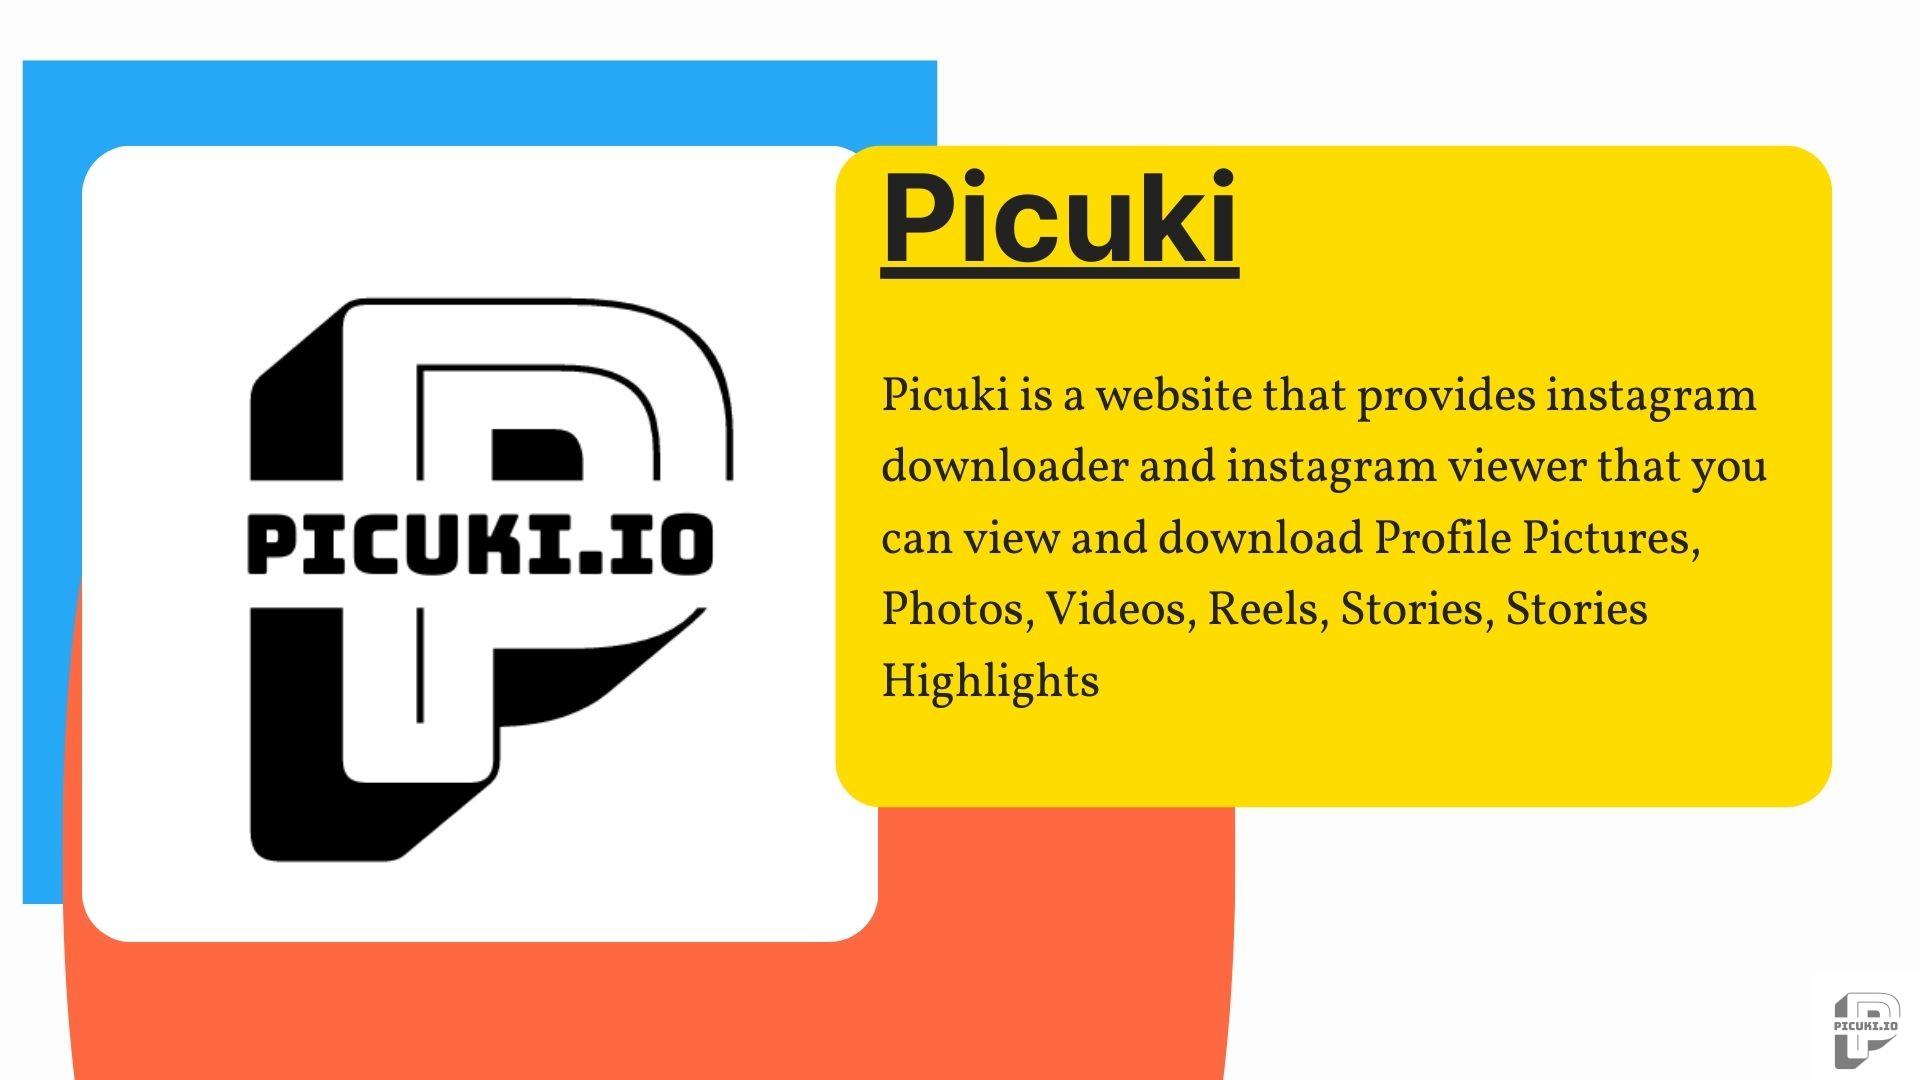 What is picuki